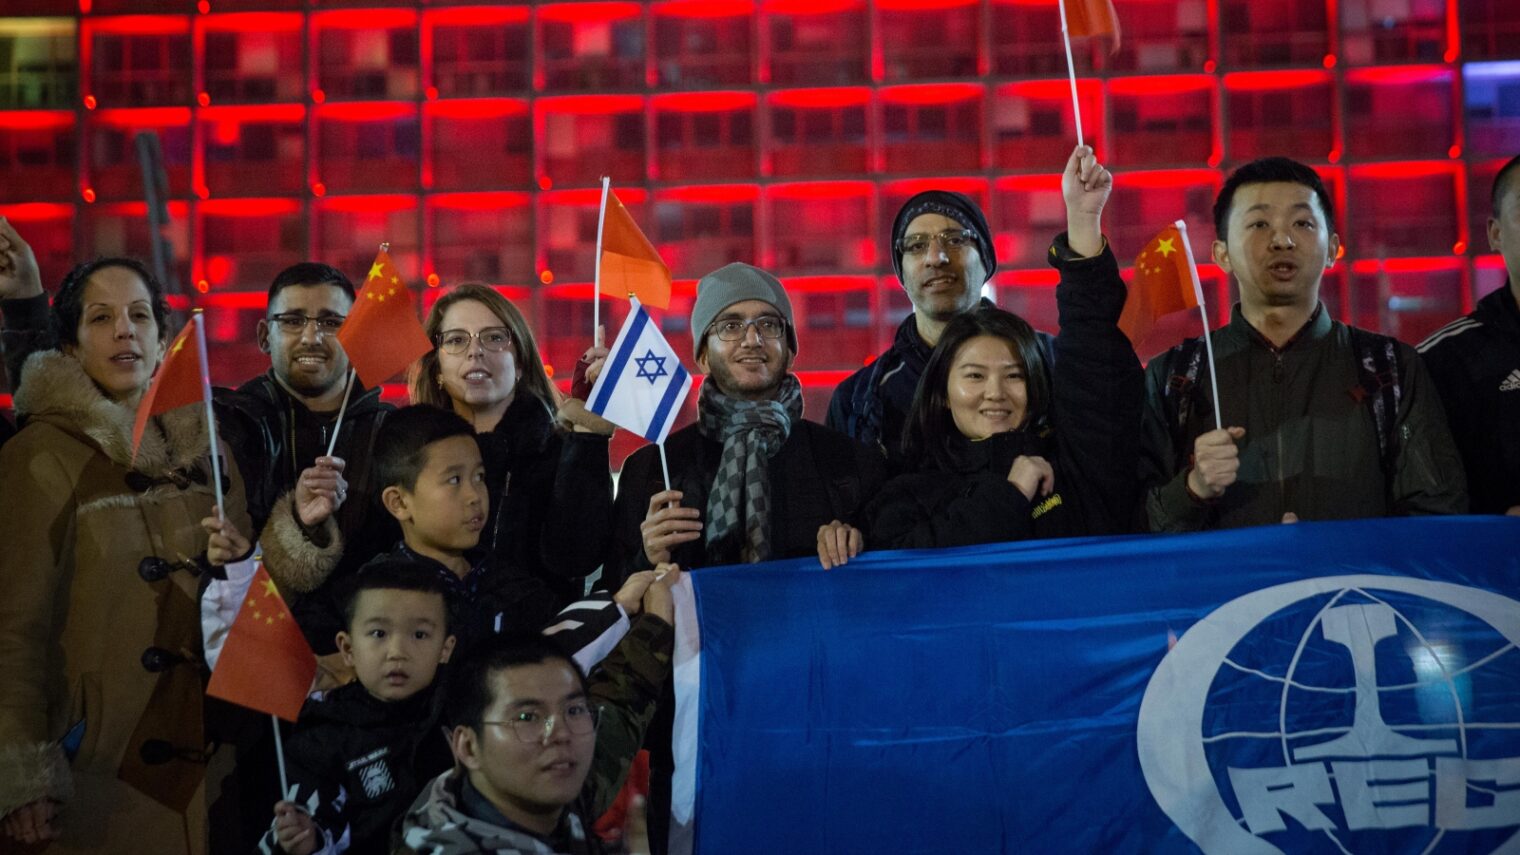 Members of the Chinese community in Israel held a solidarity rally in Tel Aviv on February 11, 2020, to show support of the Chinese people in fighting coronavirus. Photo by Miriam Alster/Flash90